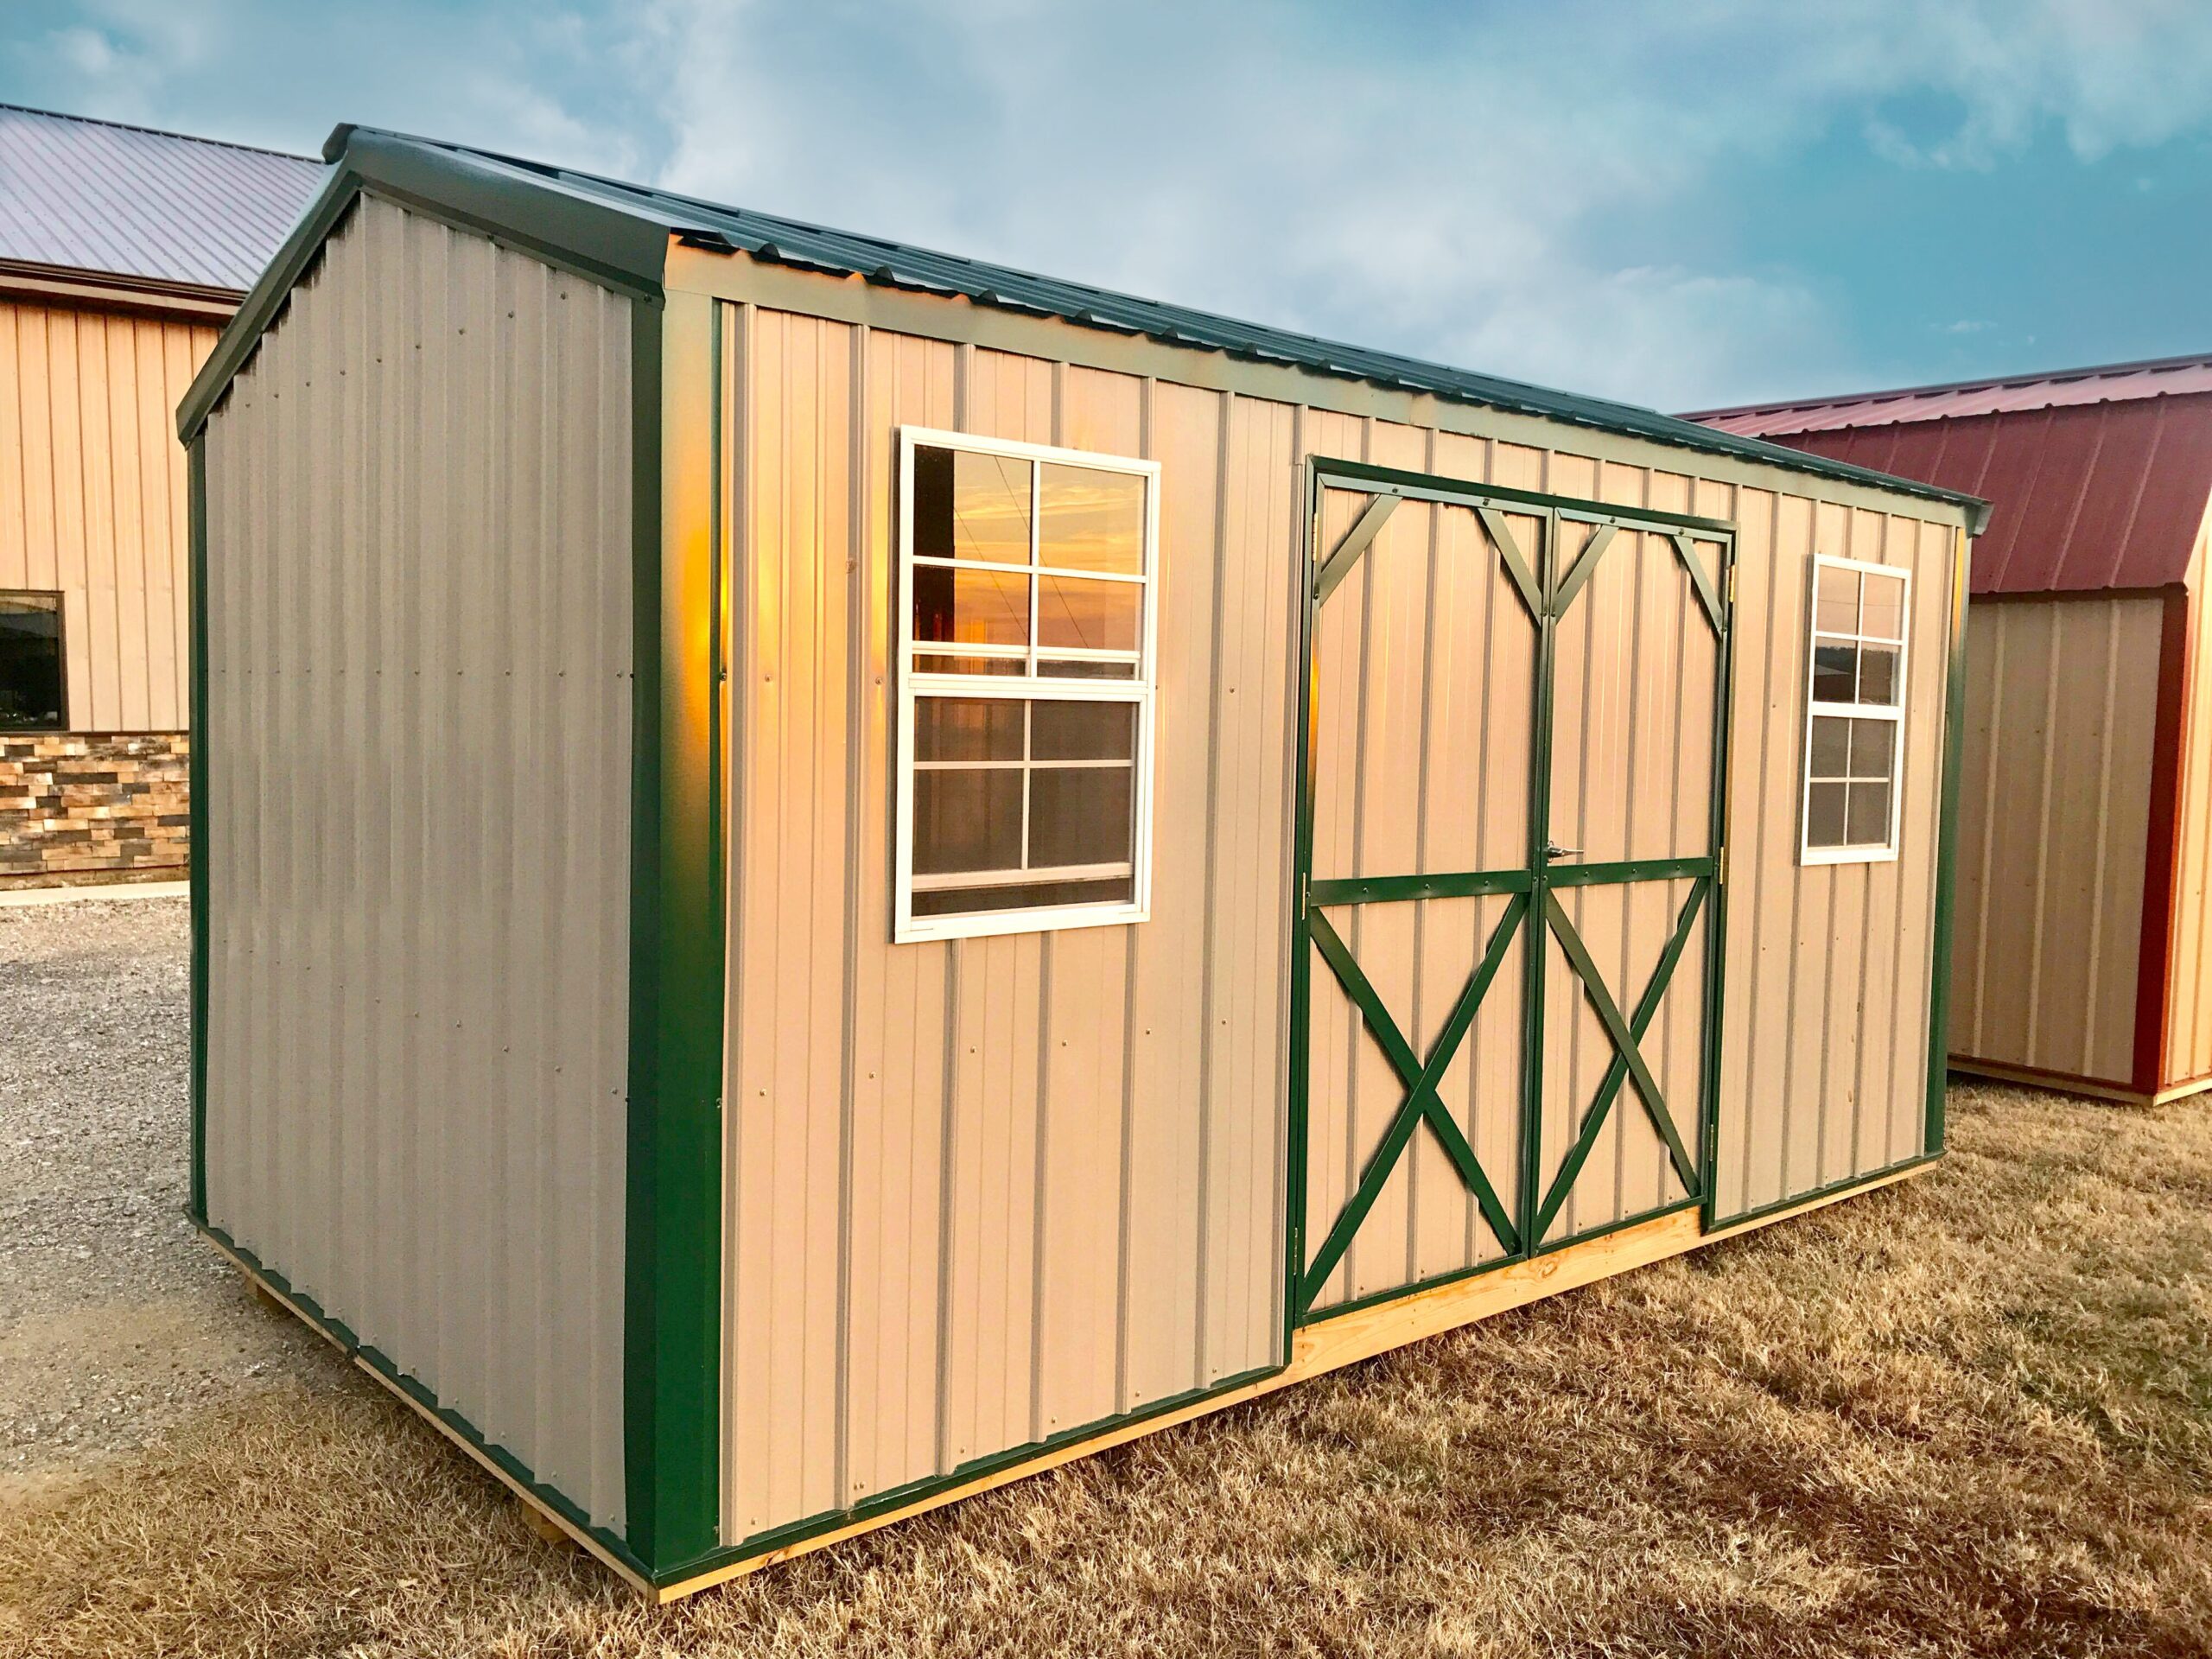 Tan all metal shed with green trim and roof